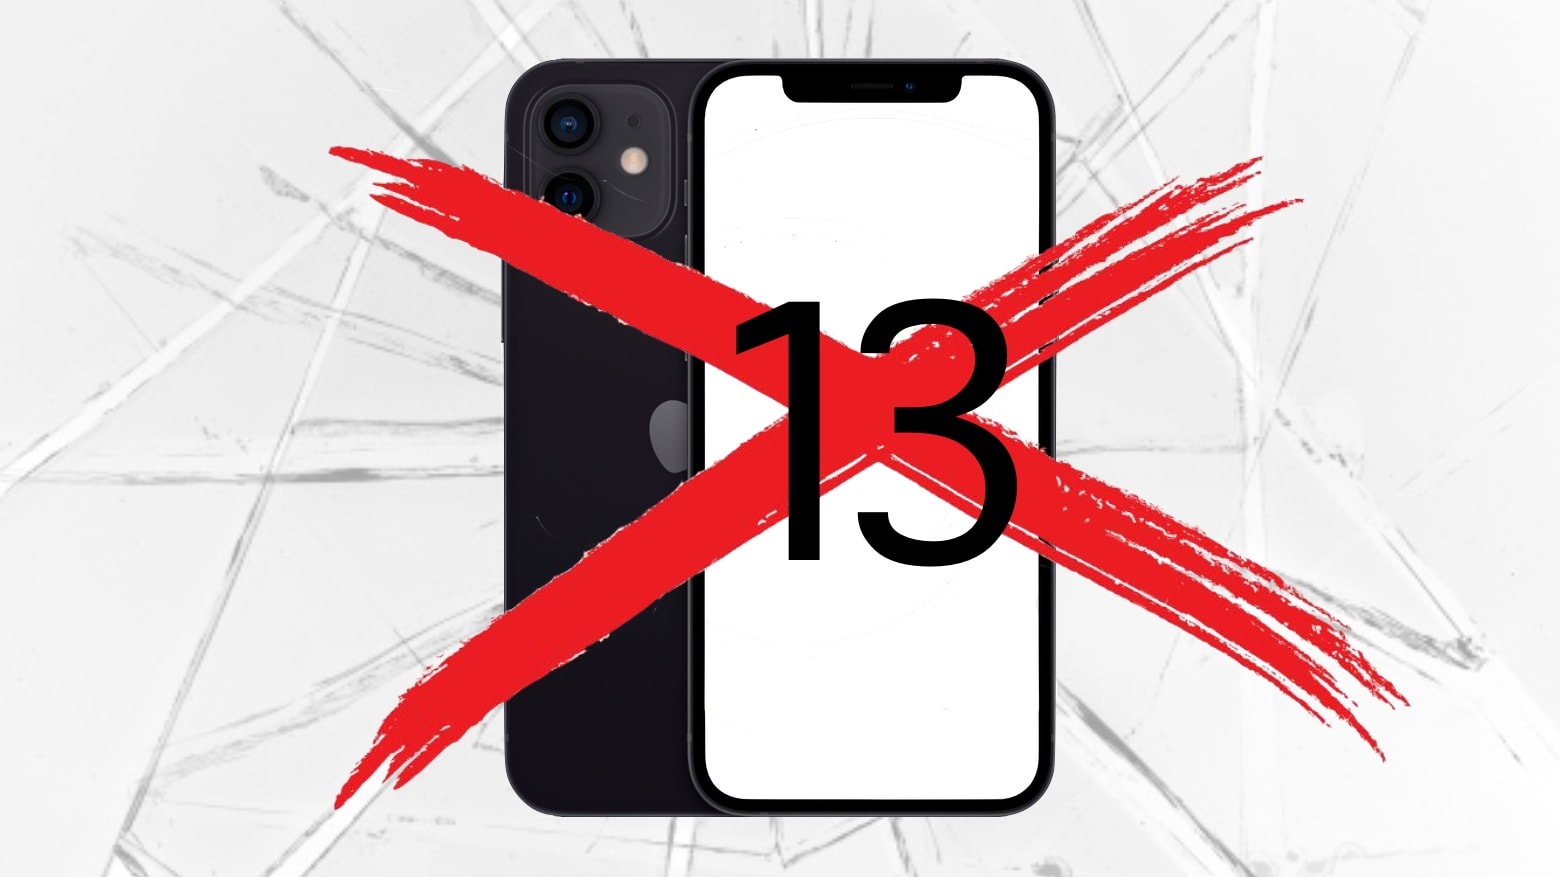 Some customers prefer that the new iPhone does not carry the number 13.